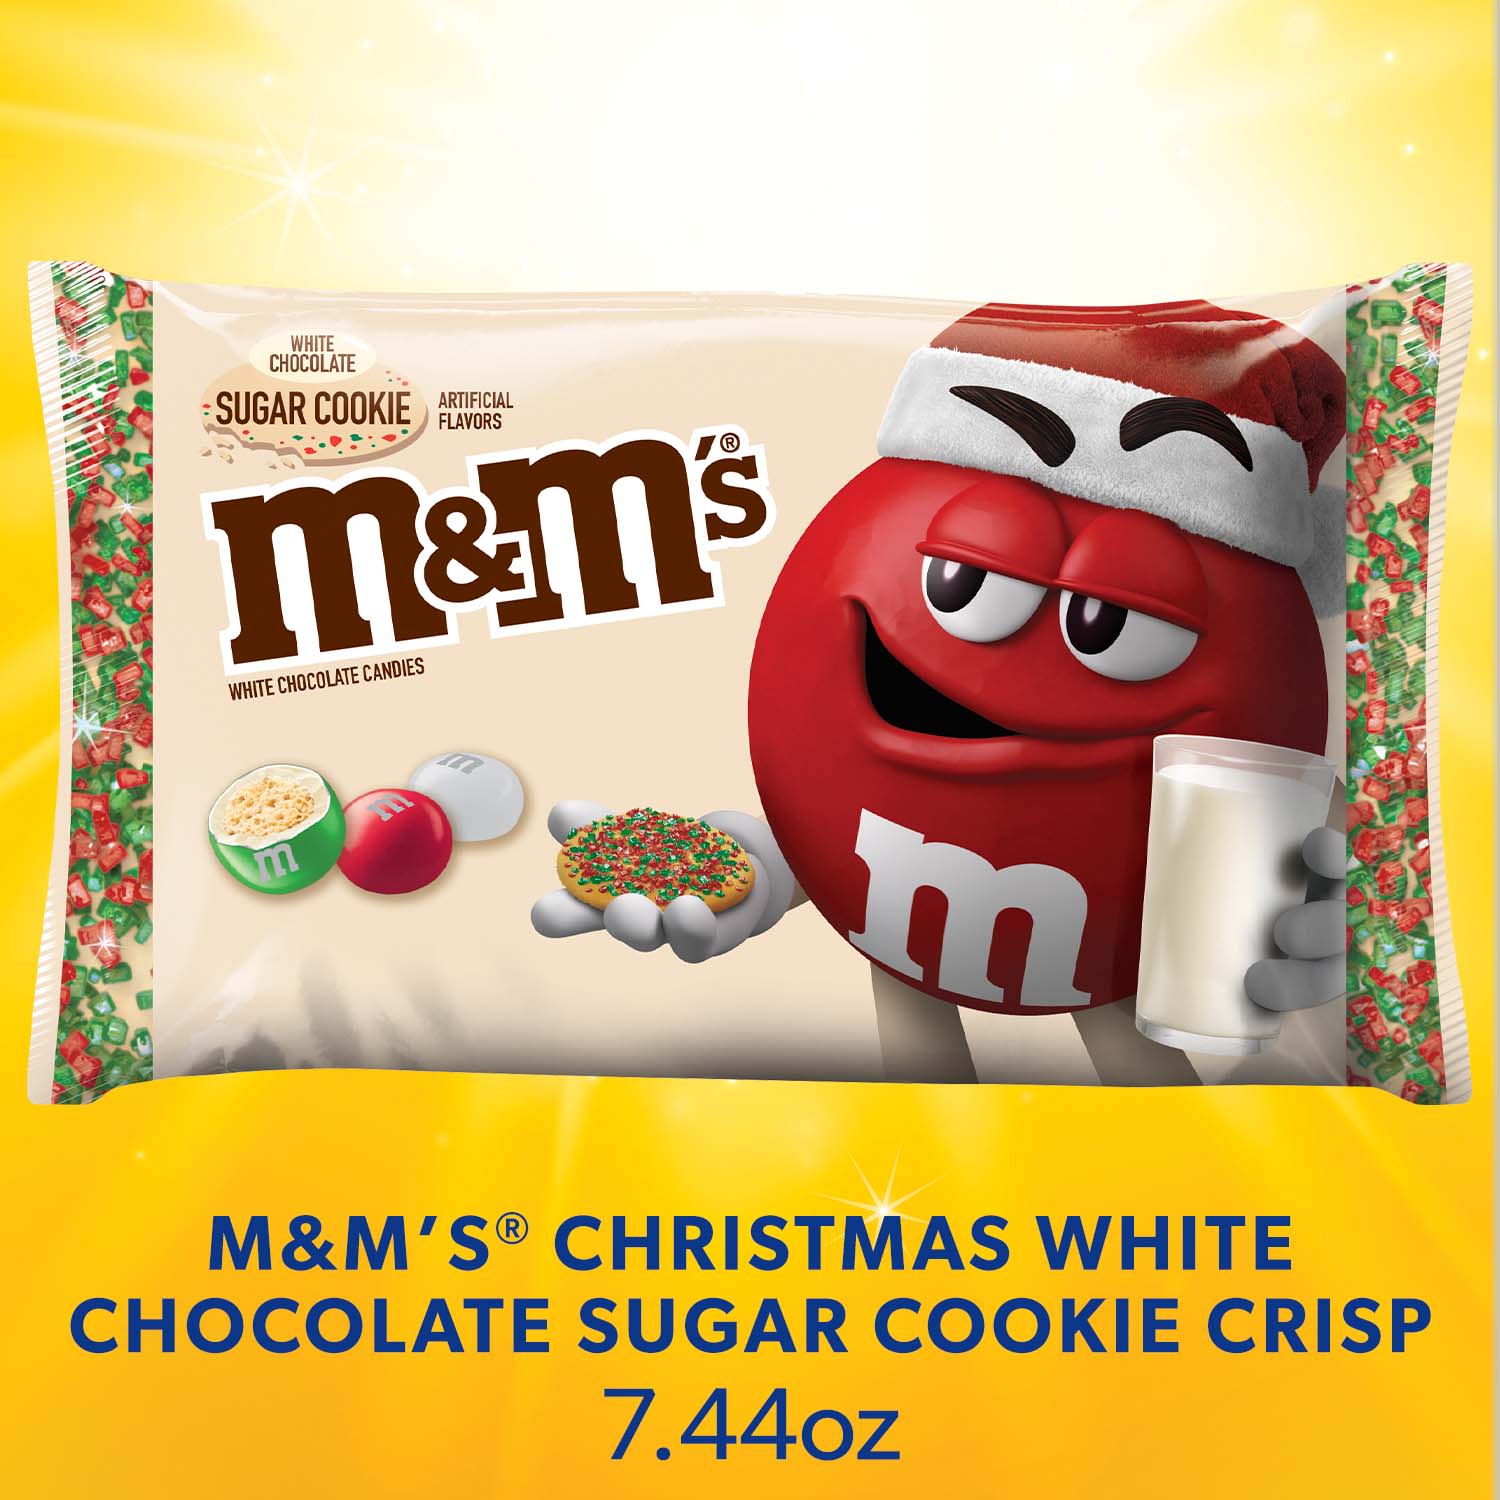 M&M'S Christmas White Chocolate Sugar Cookie Candy - image 2 of 10